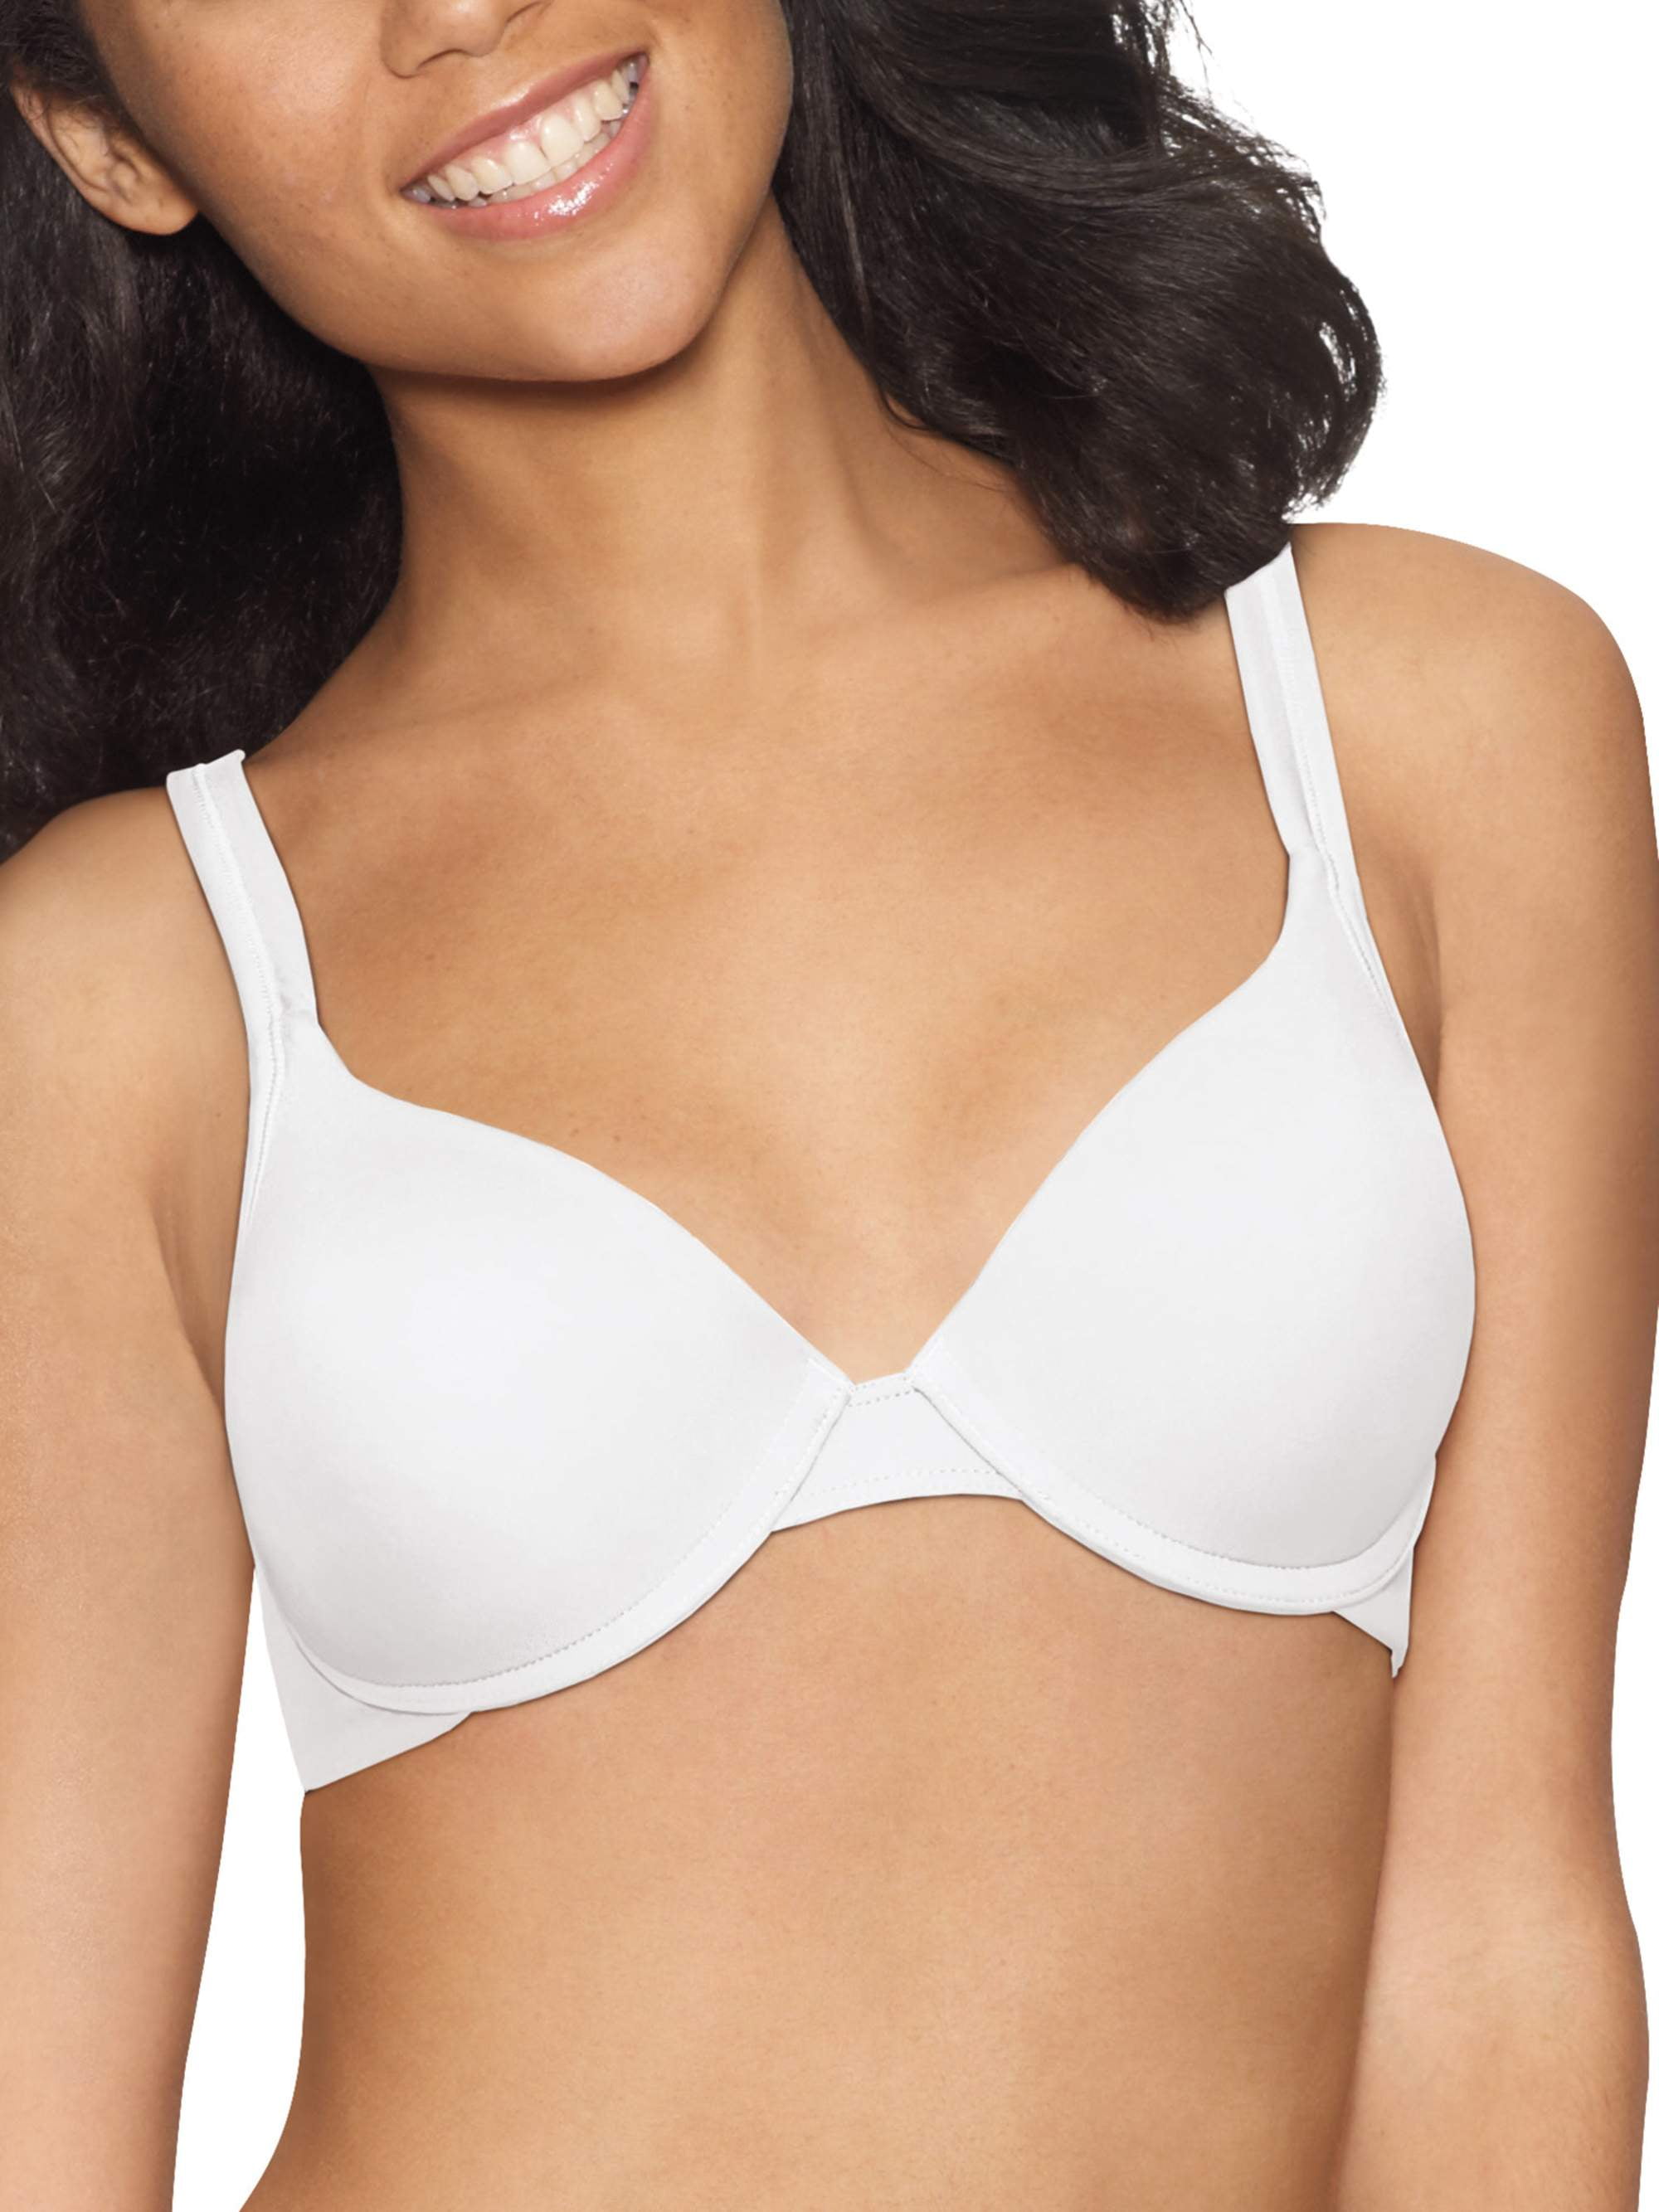 Hanes Women's natural lift and shape underwire bra, style g188